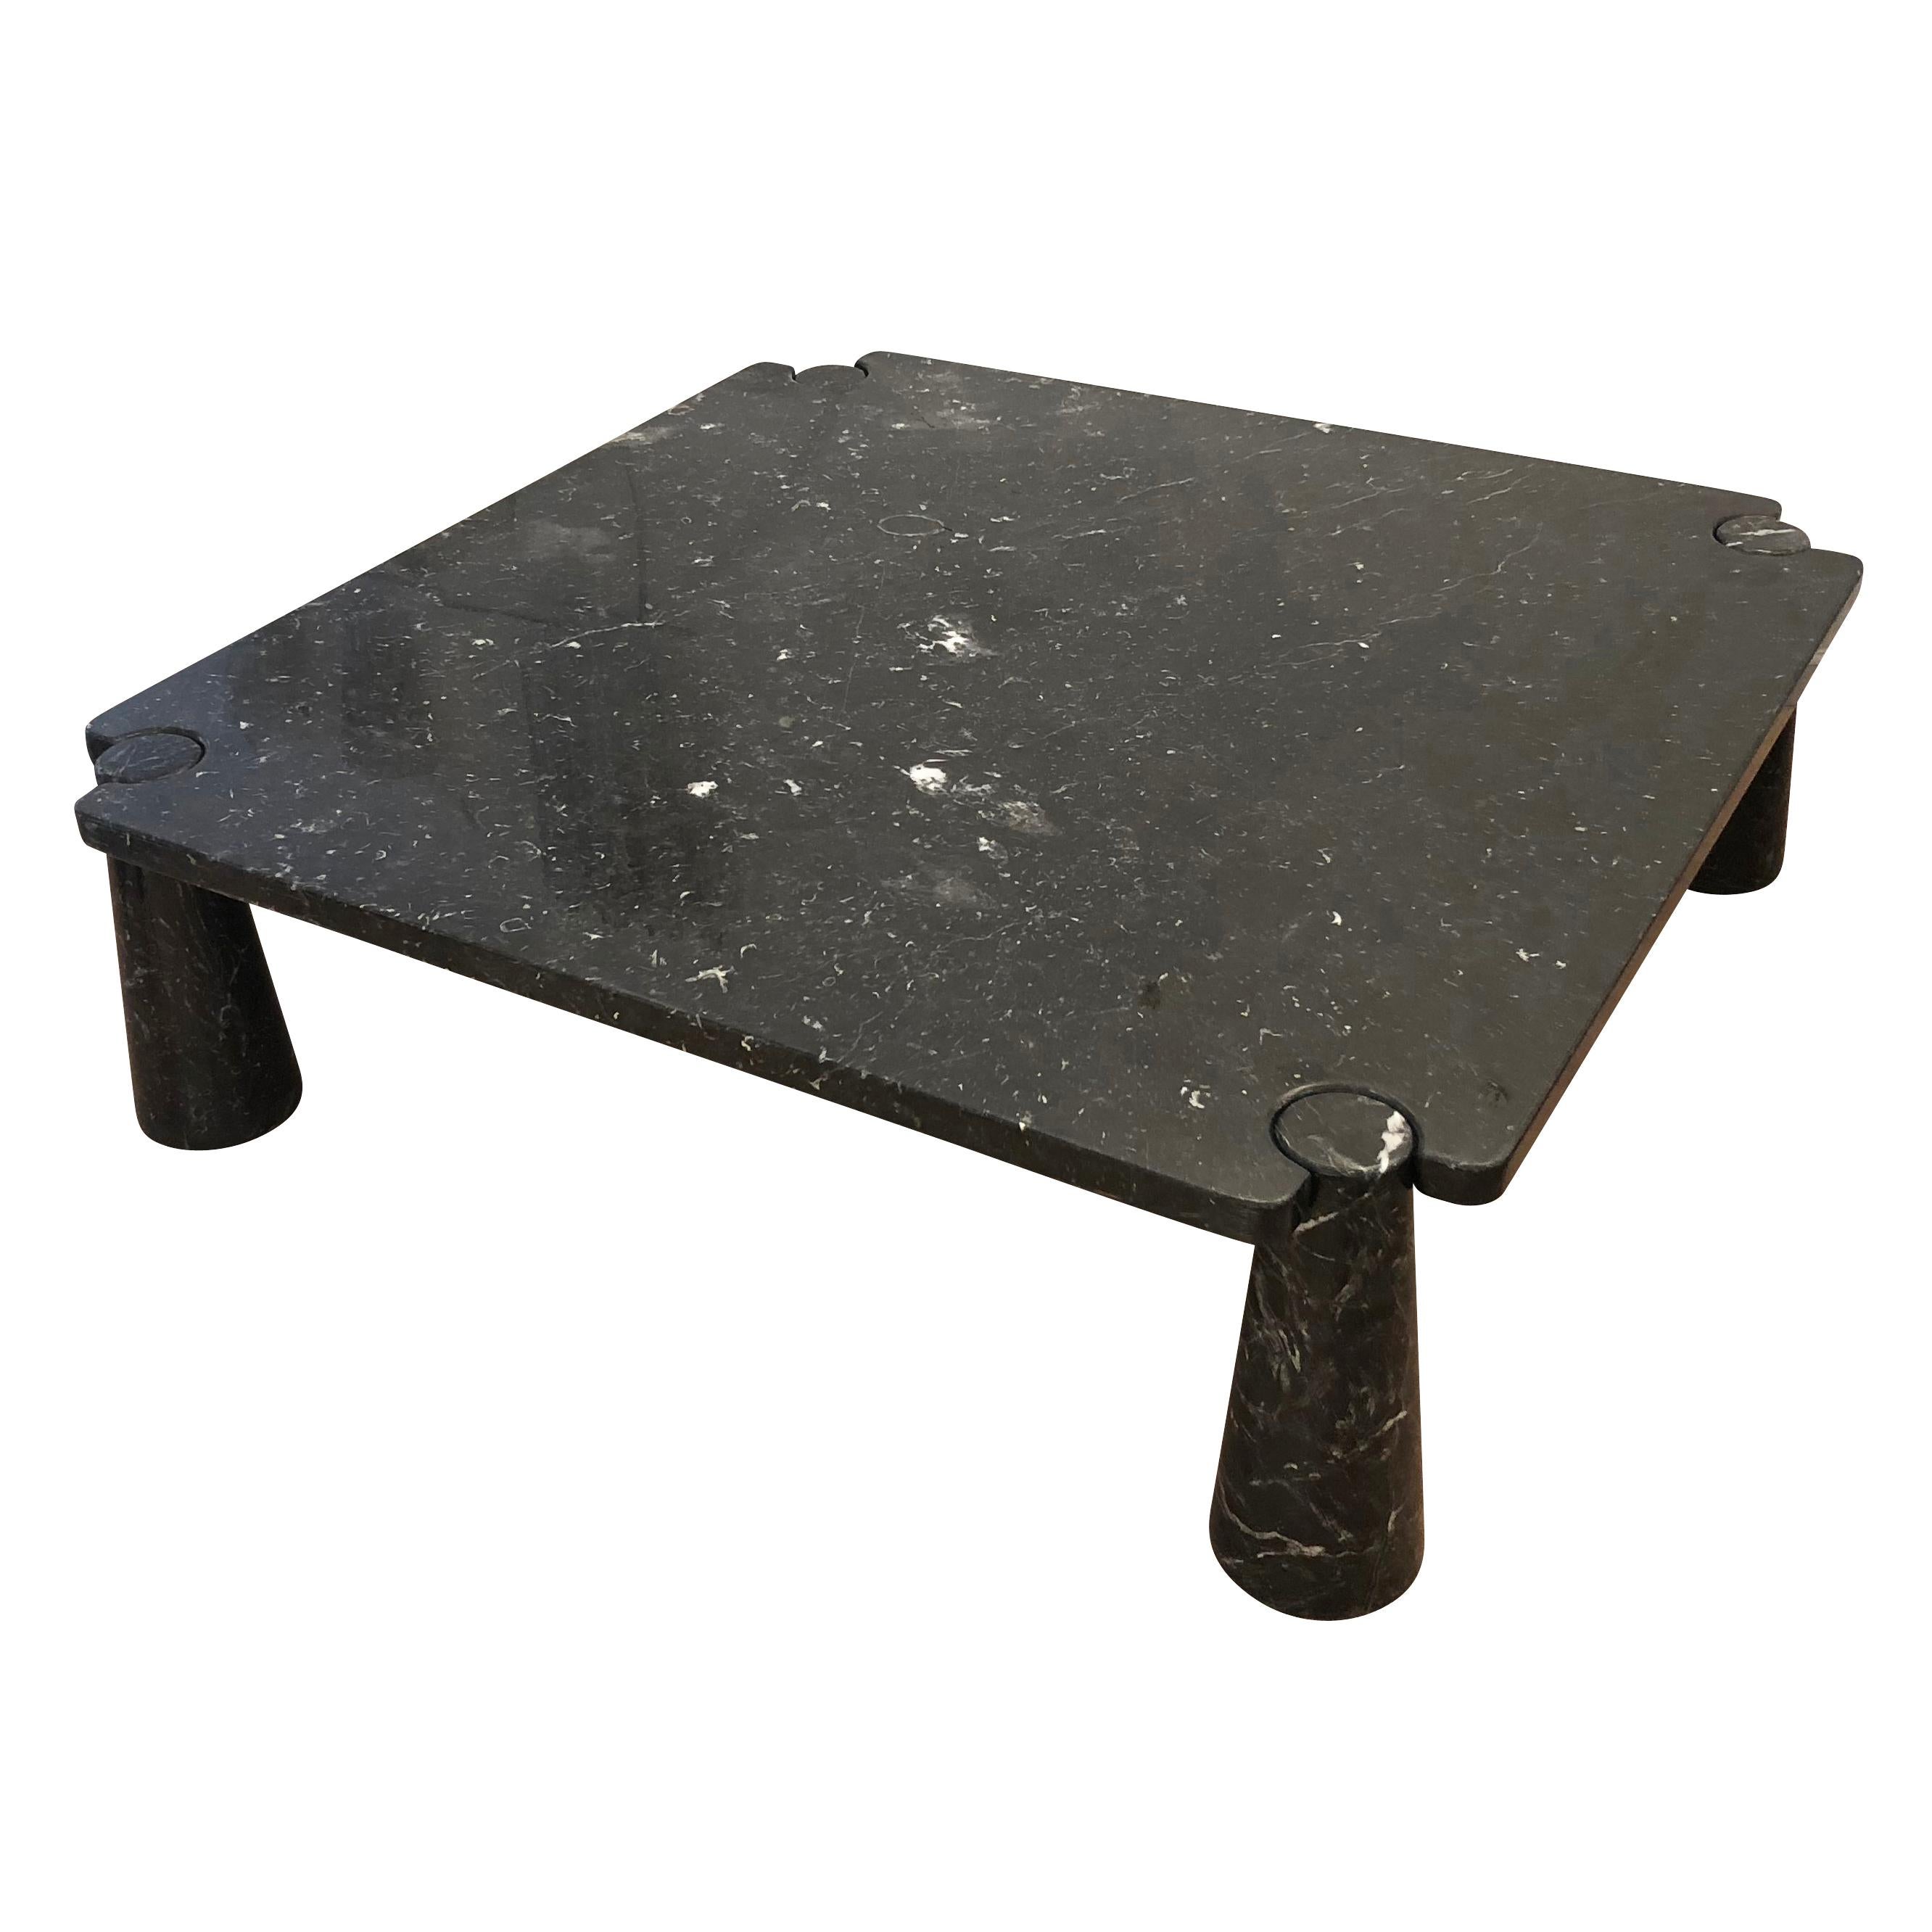 Large black marble coffee table designed by Angelo Mangiarotti in 1971. The piece uses the concept of “gravity joints” were the conical legs and top are set and locked in place by the weight of the material itself.

Condition: Good vintage